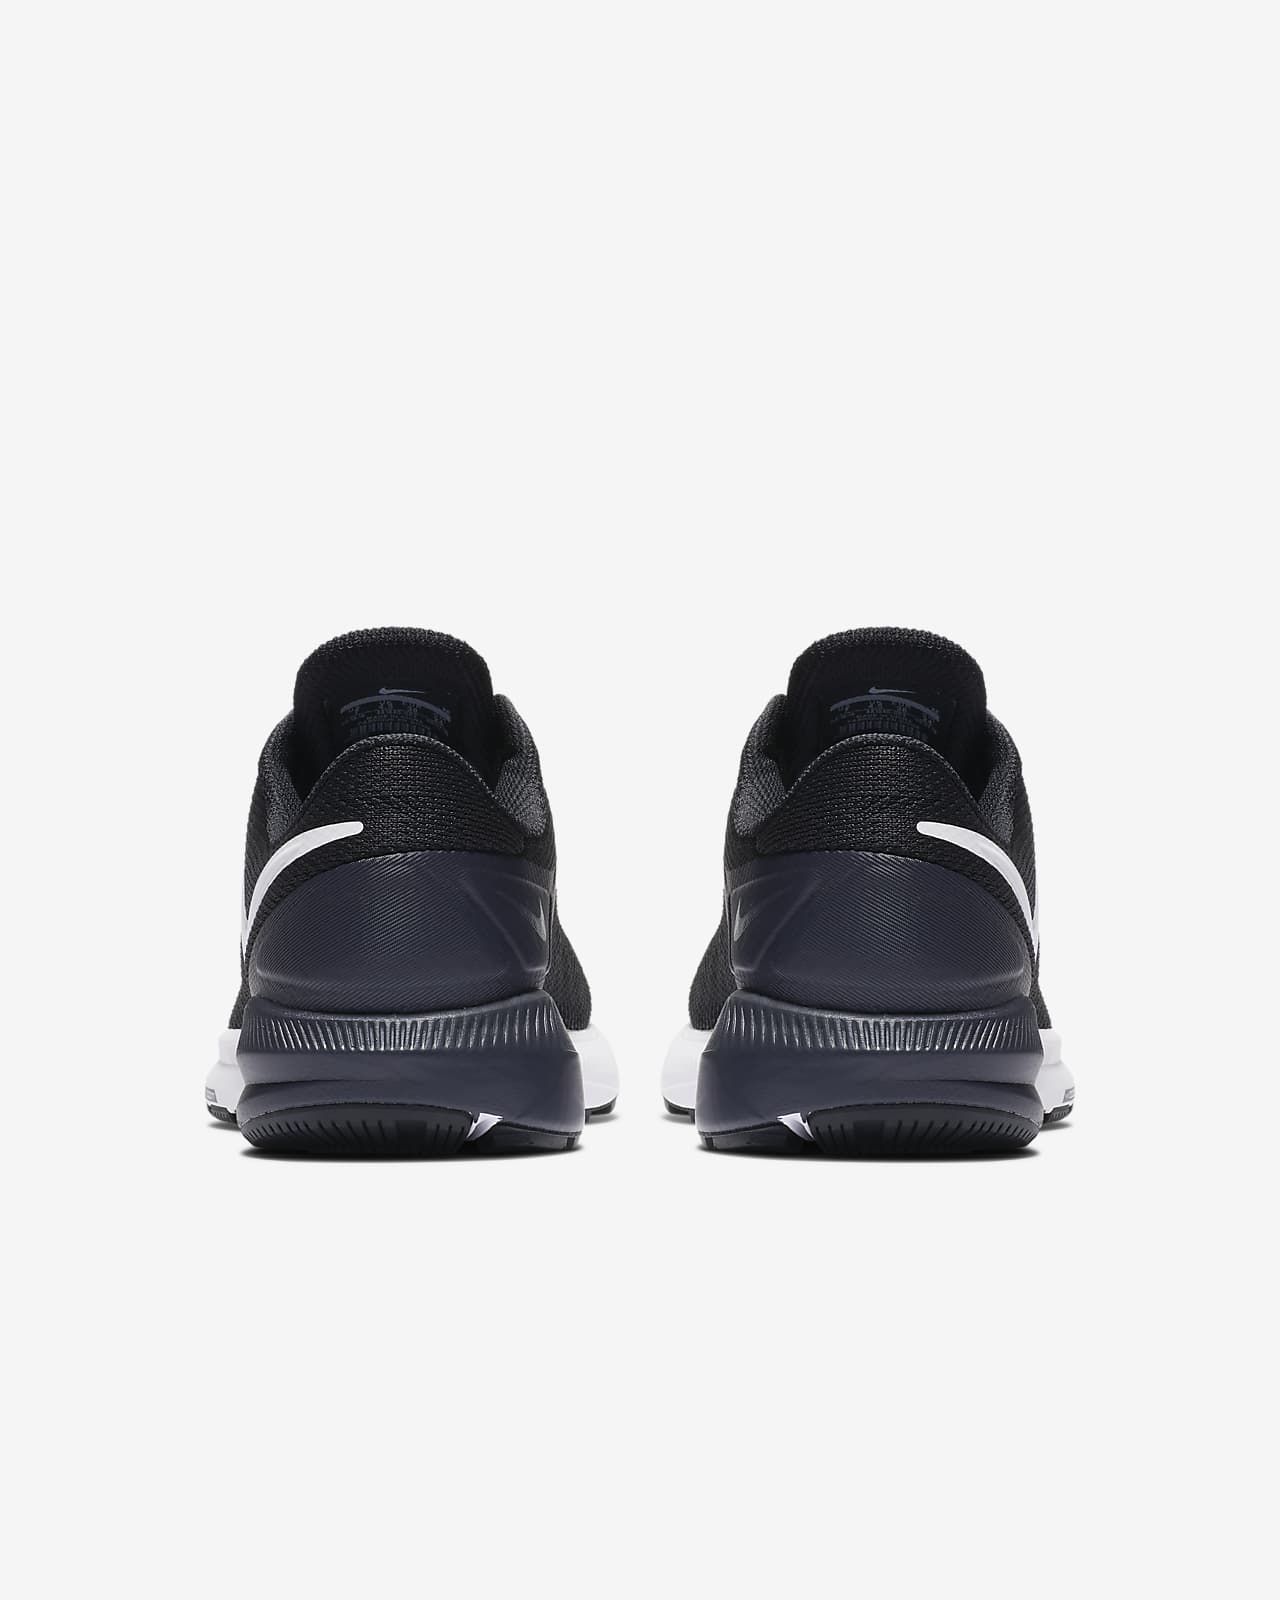 nike zoom structure 17 black